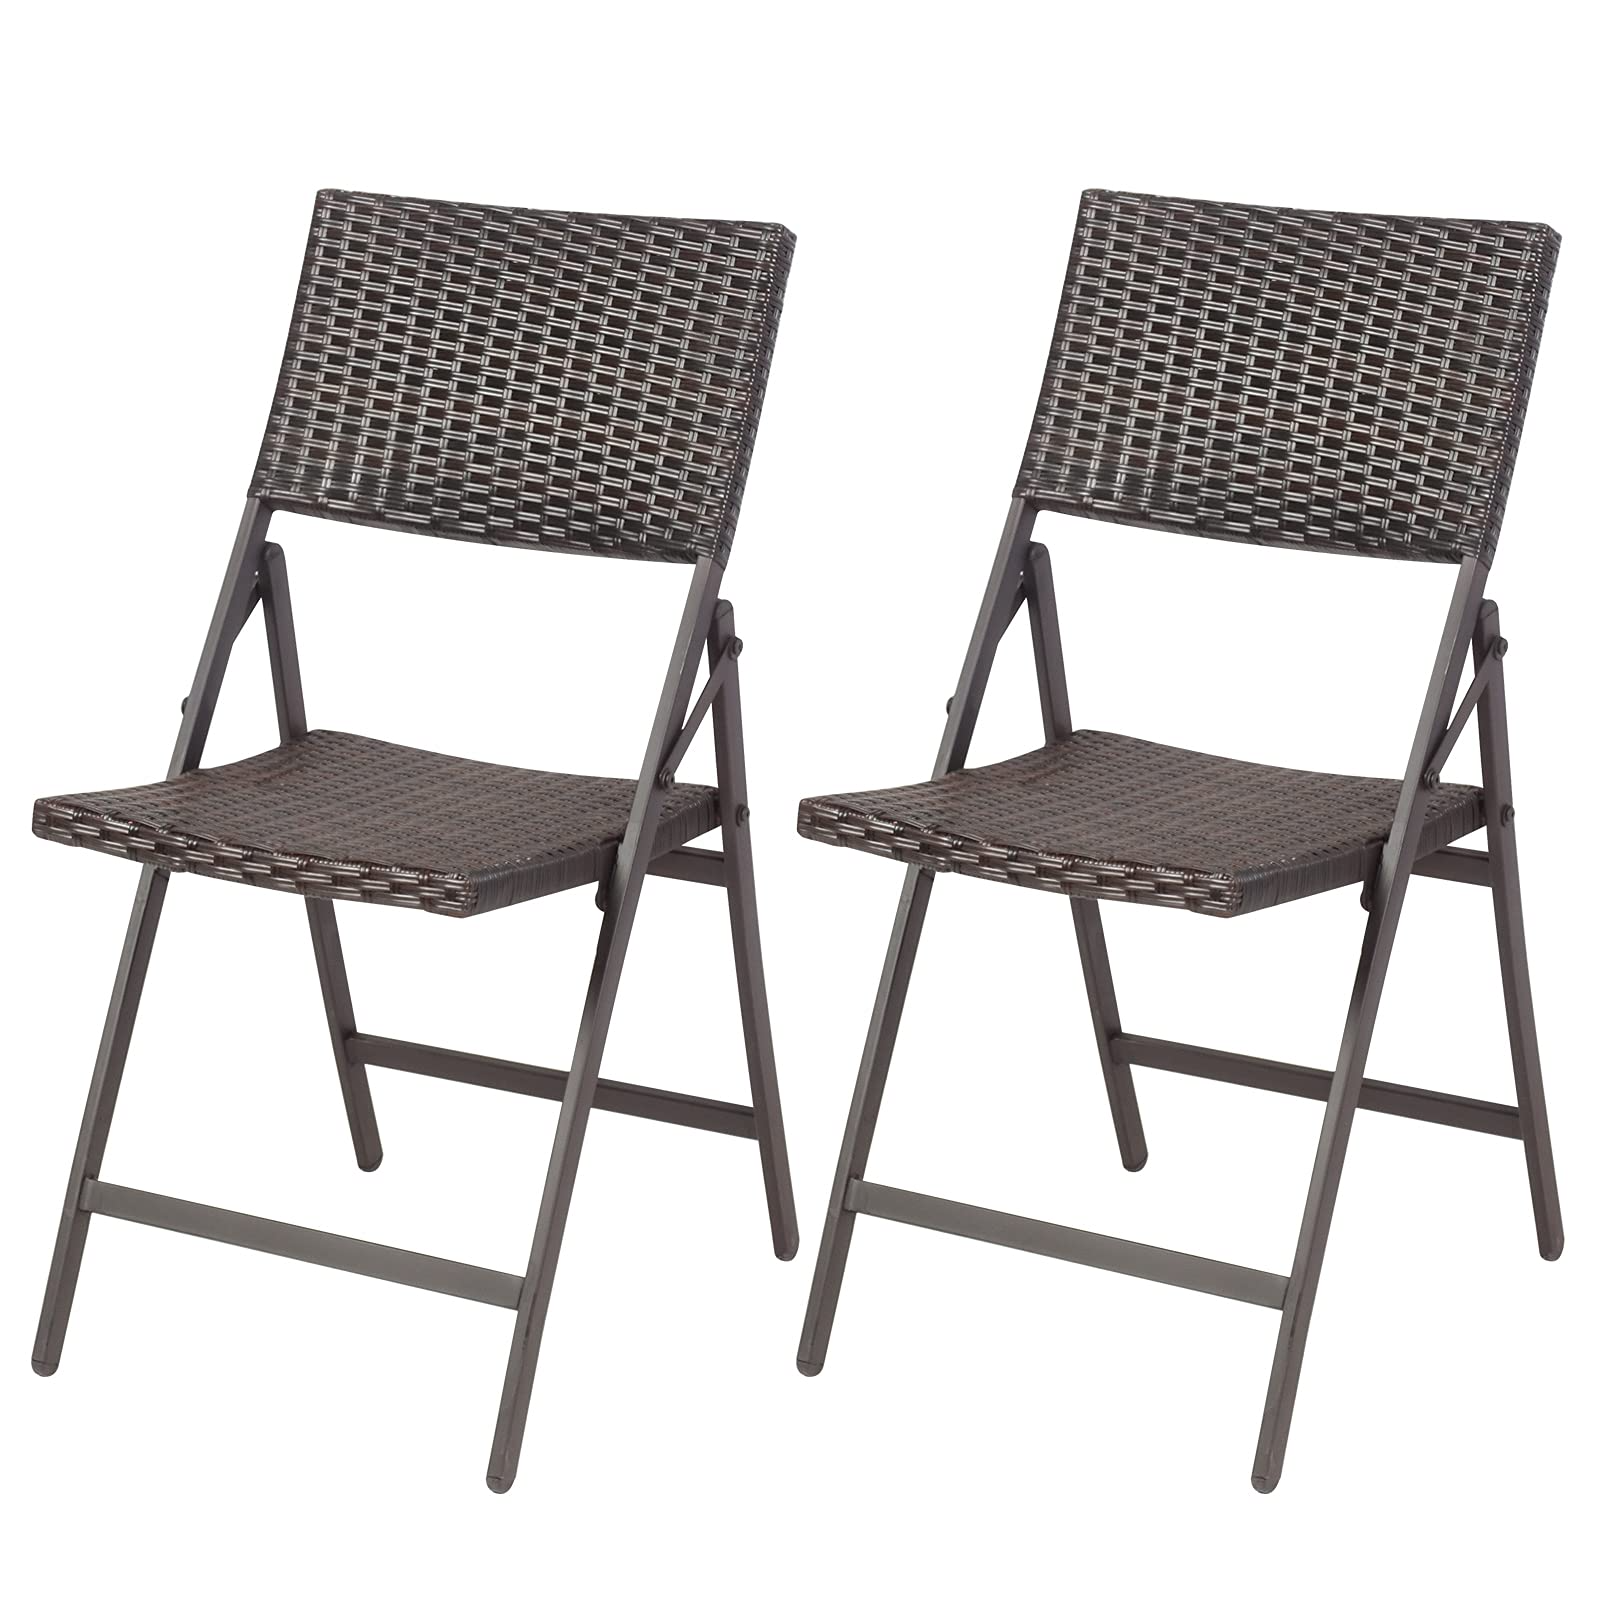 Giantex Set of 2 Patio Chairs, Folding Rattan Lawn Chairs with Armrest